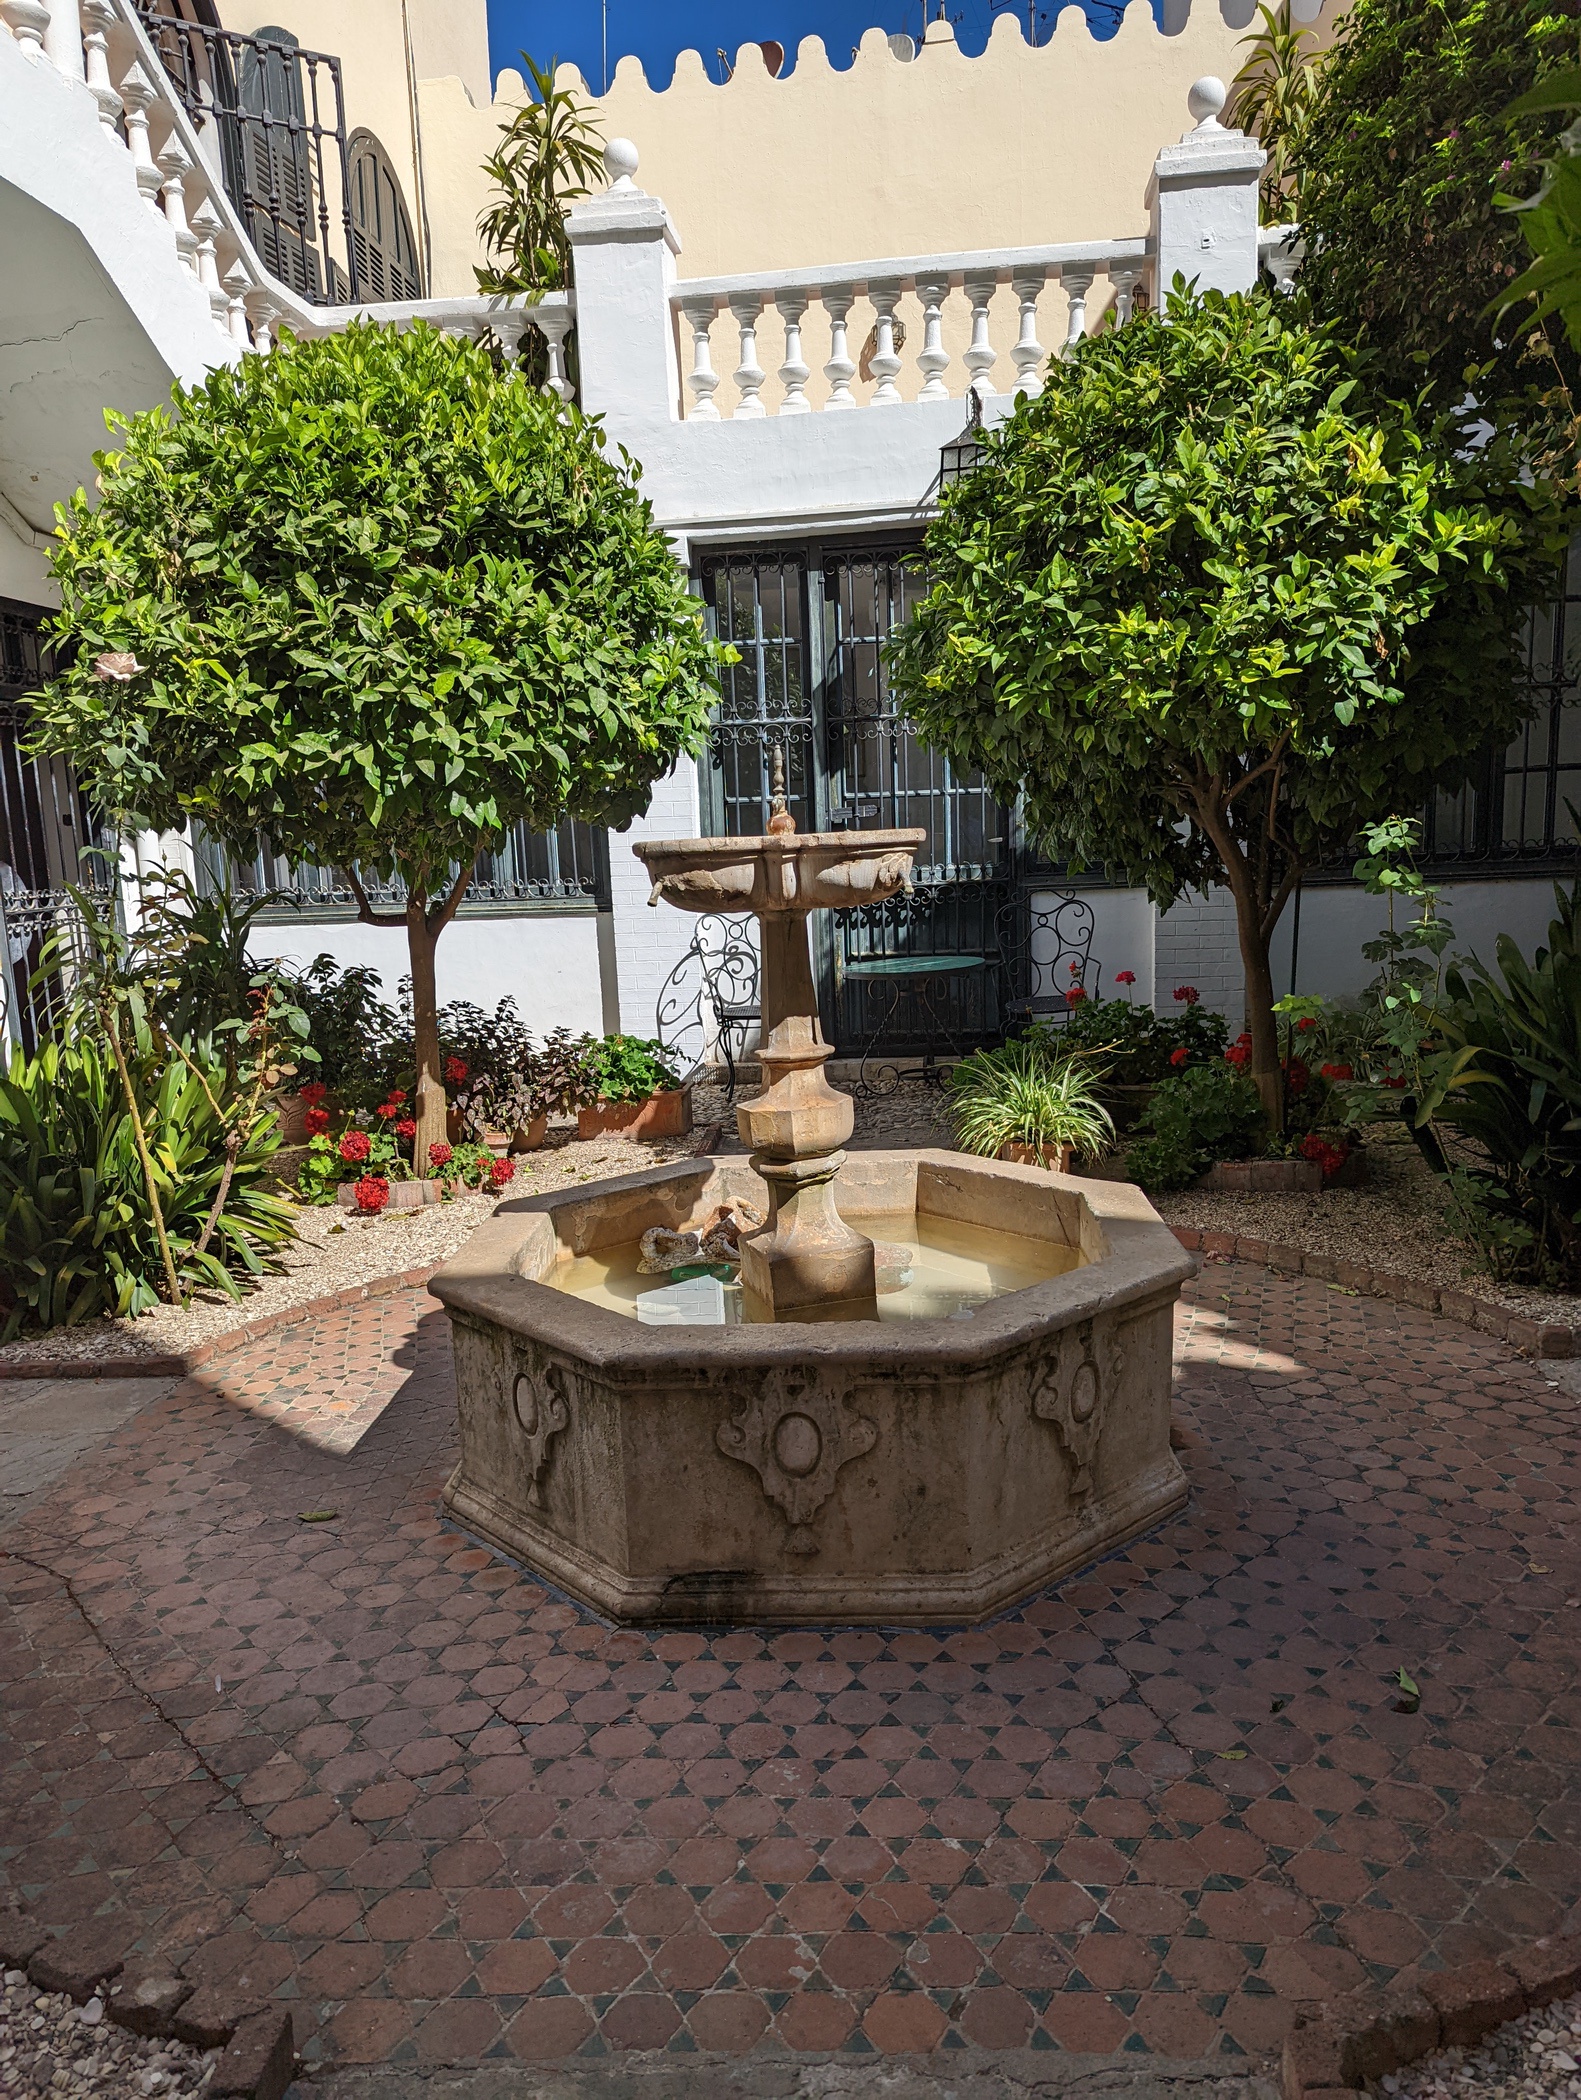 <p>View of the courtyard fountain</p>